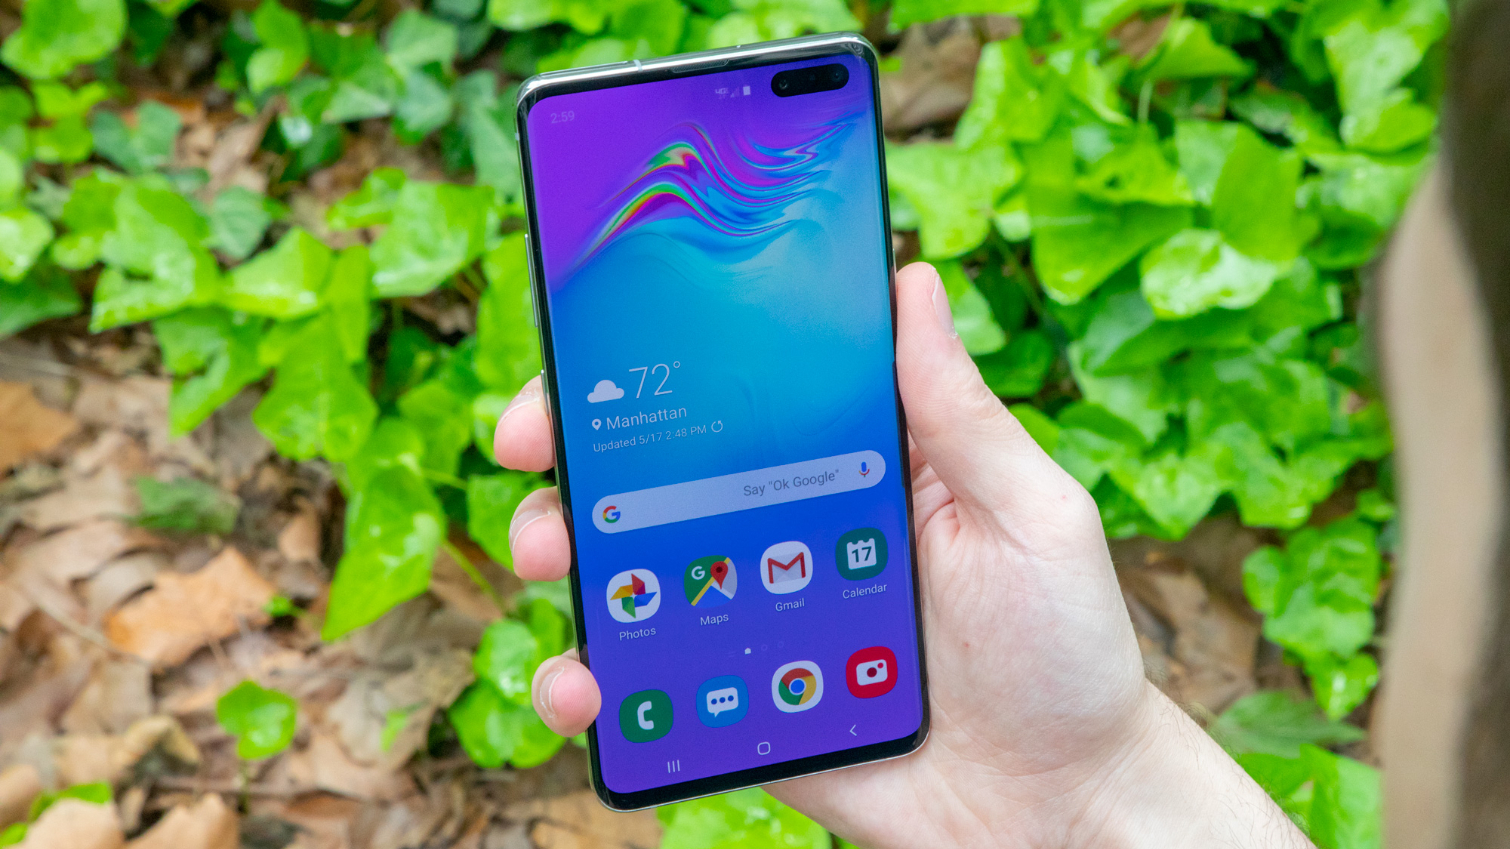 Samsung Galaxy S10 5G: Everything you need to know